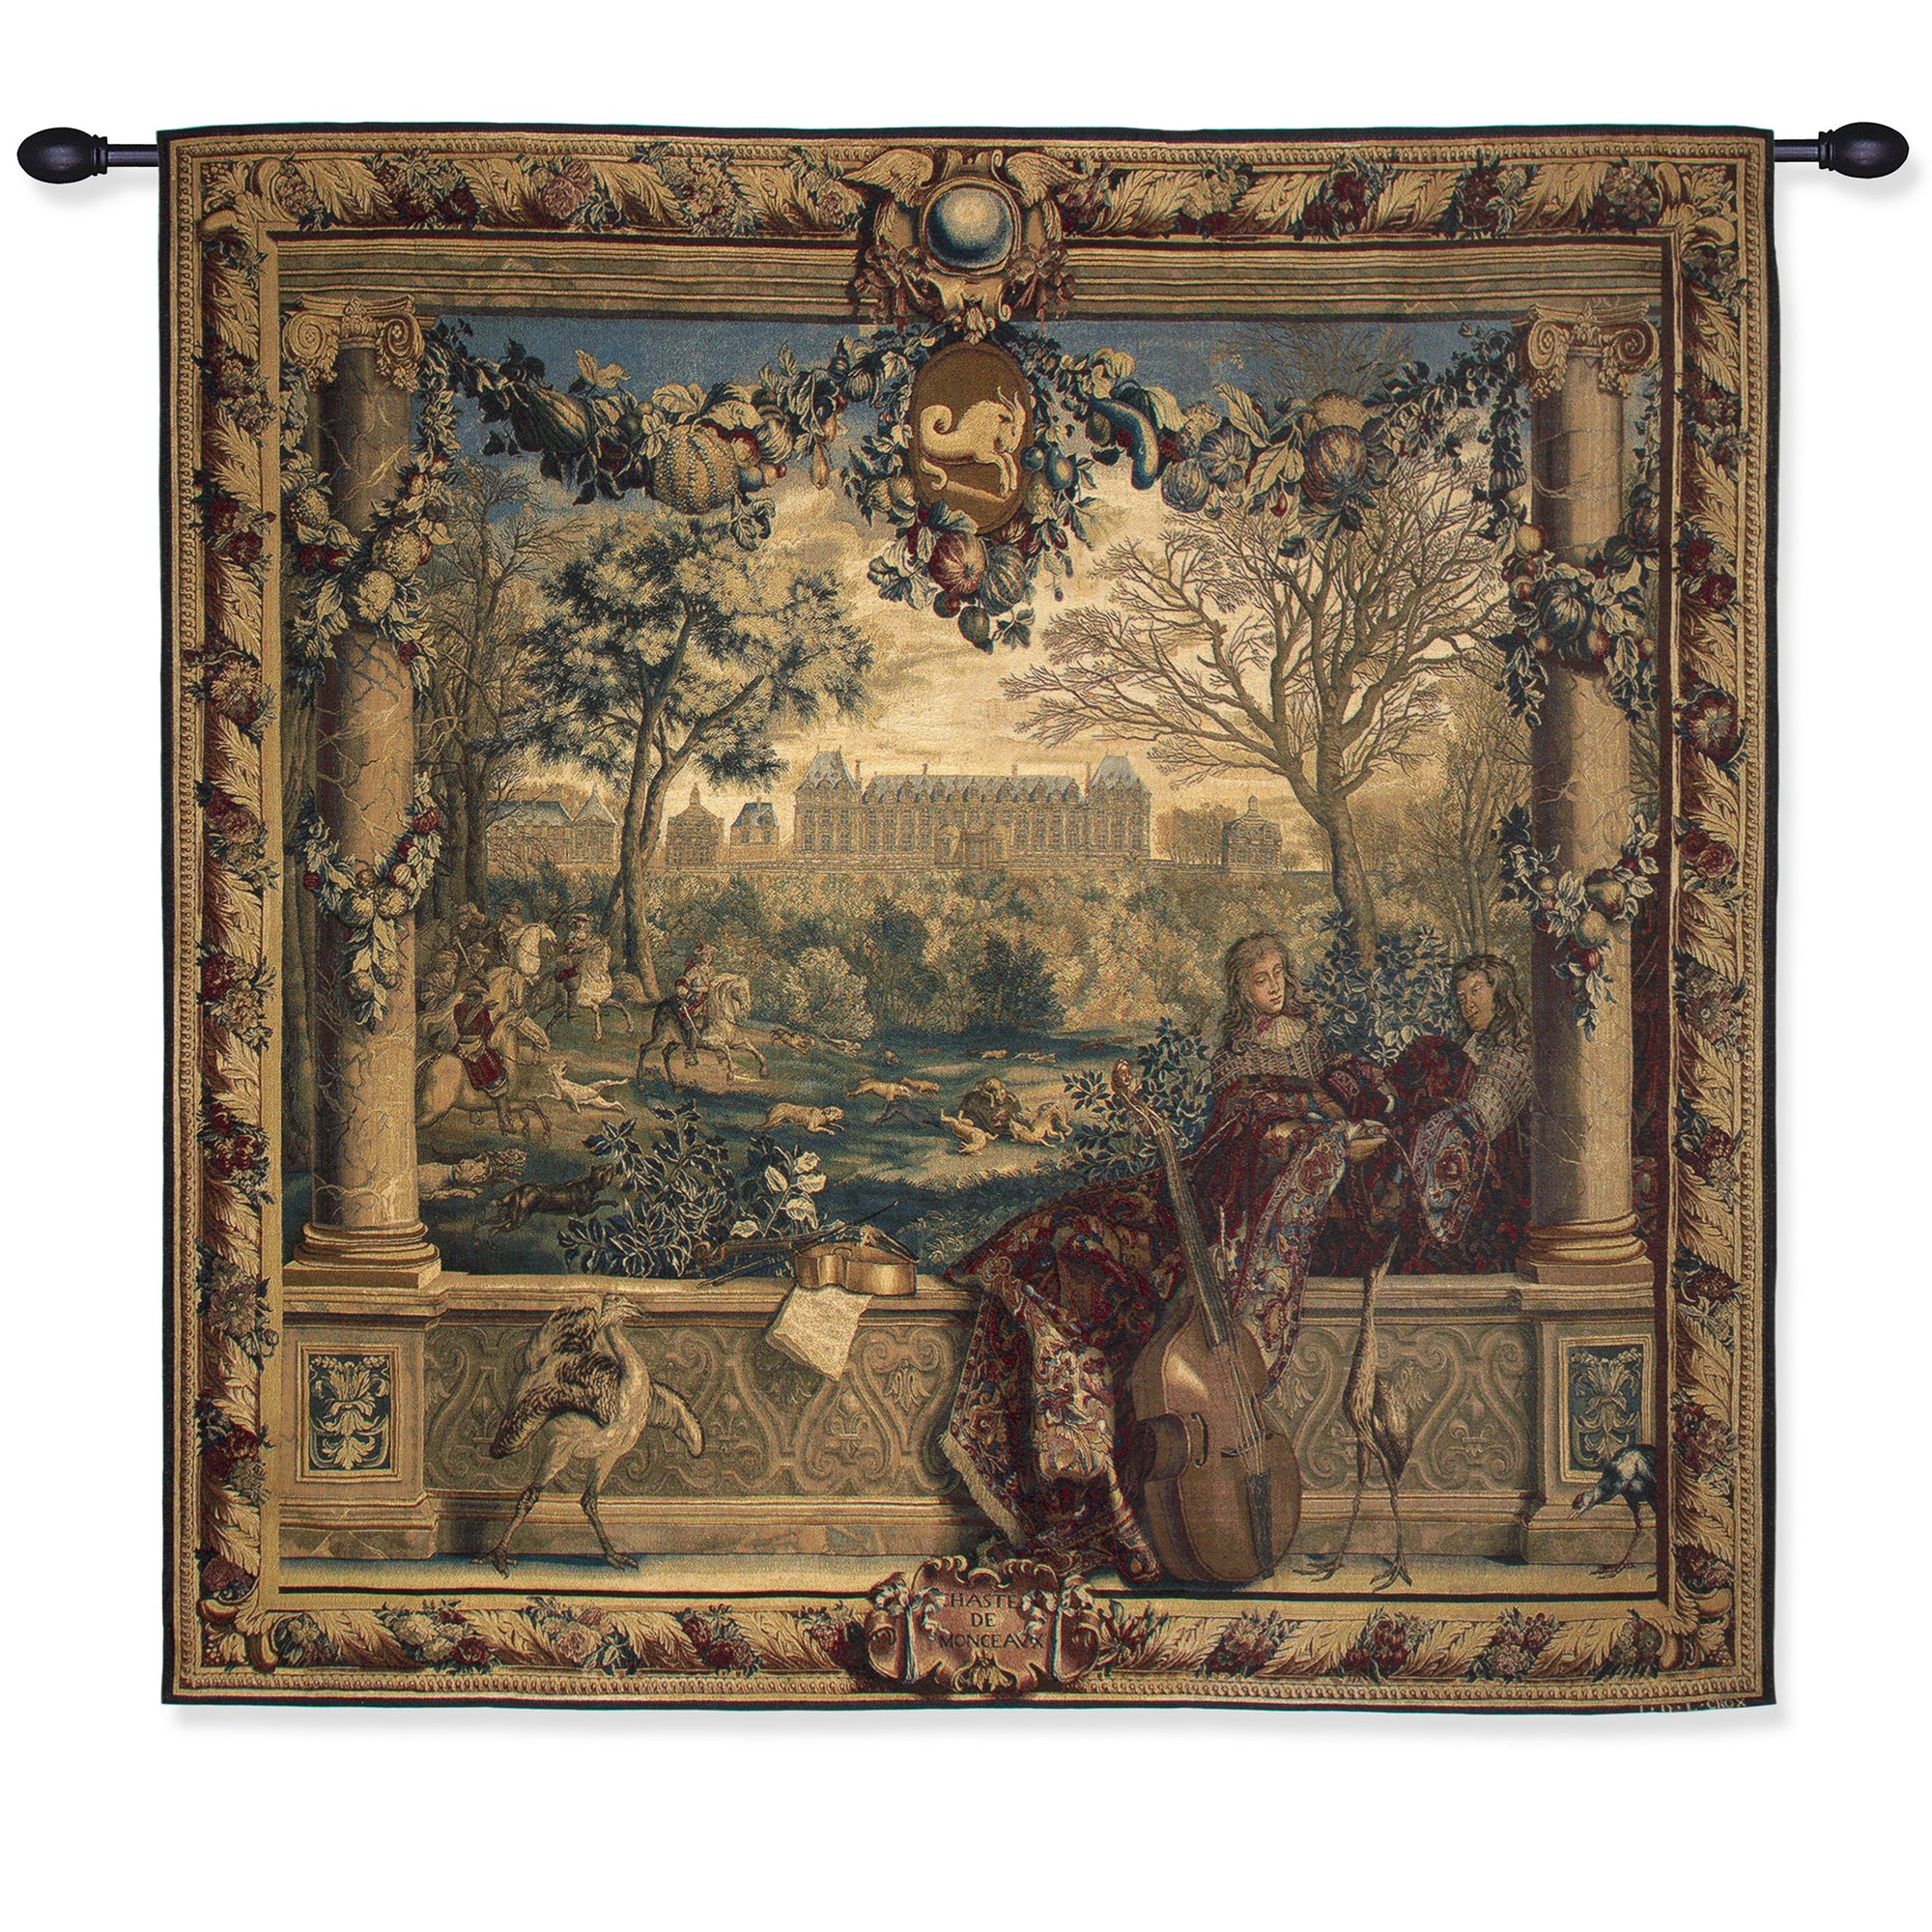 Chateau of Monceaux/Month of December-Tapestry Reproduction | Getty Store